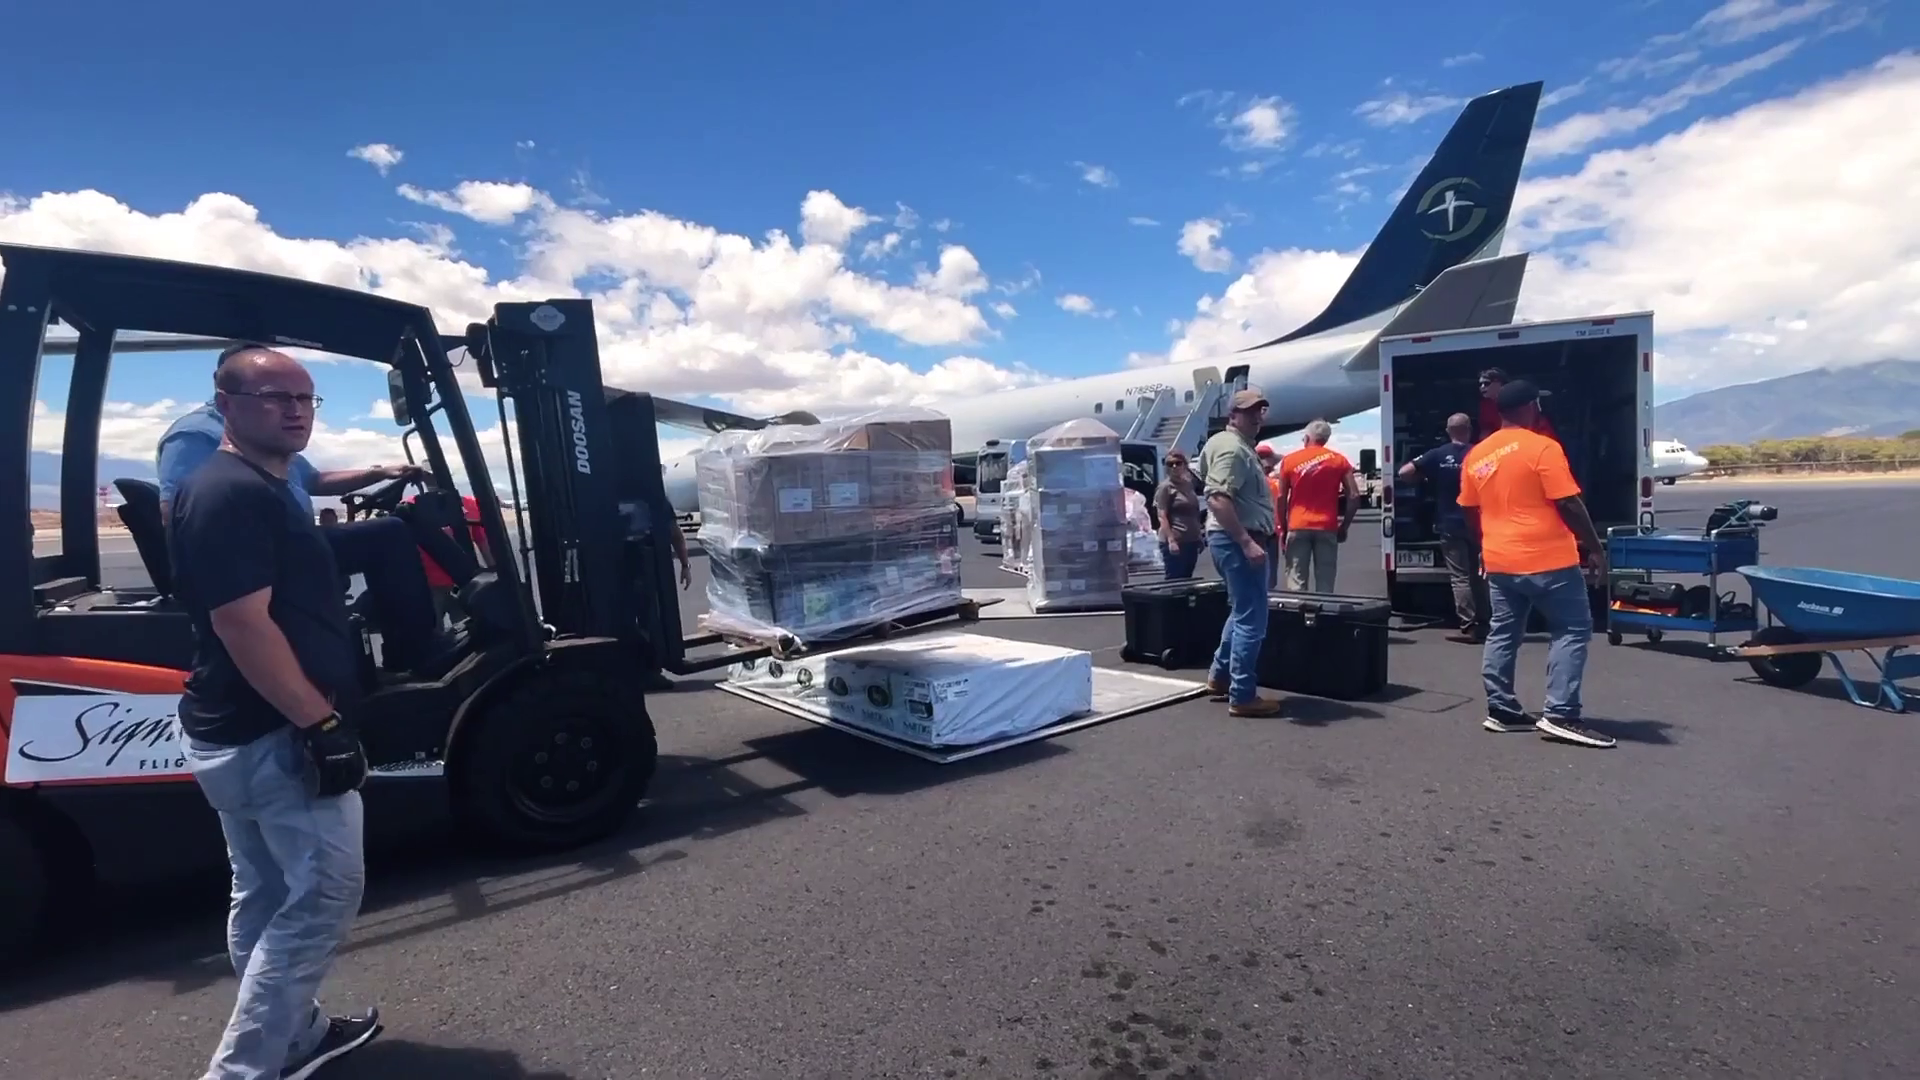 Emergency relief supplies have arrived in Hawaii to provide assistance to those suffering from the wildfires that devastated Maui